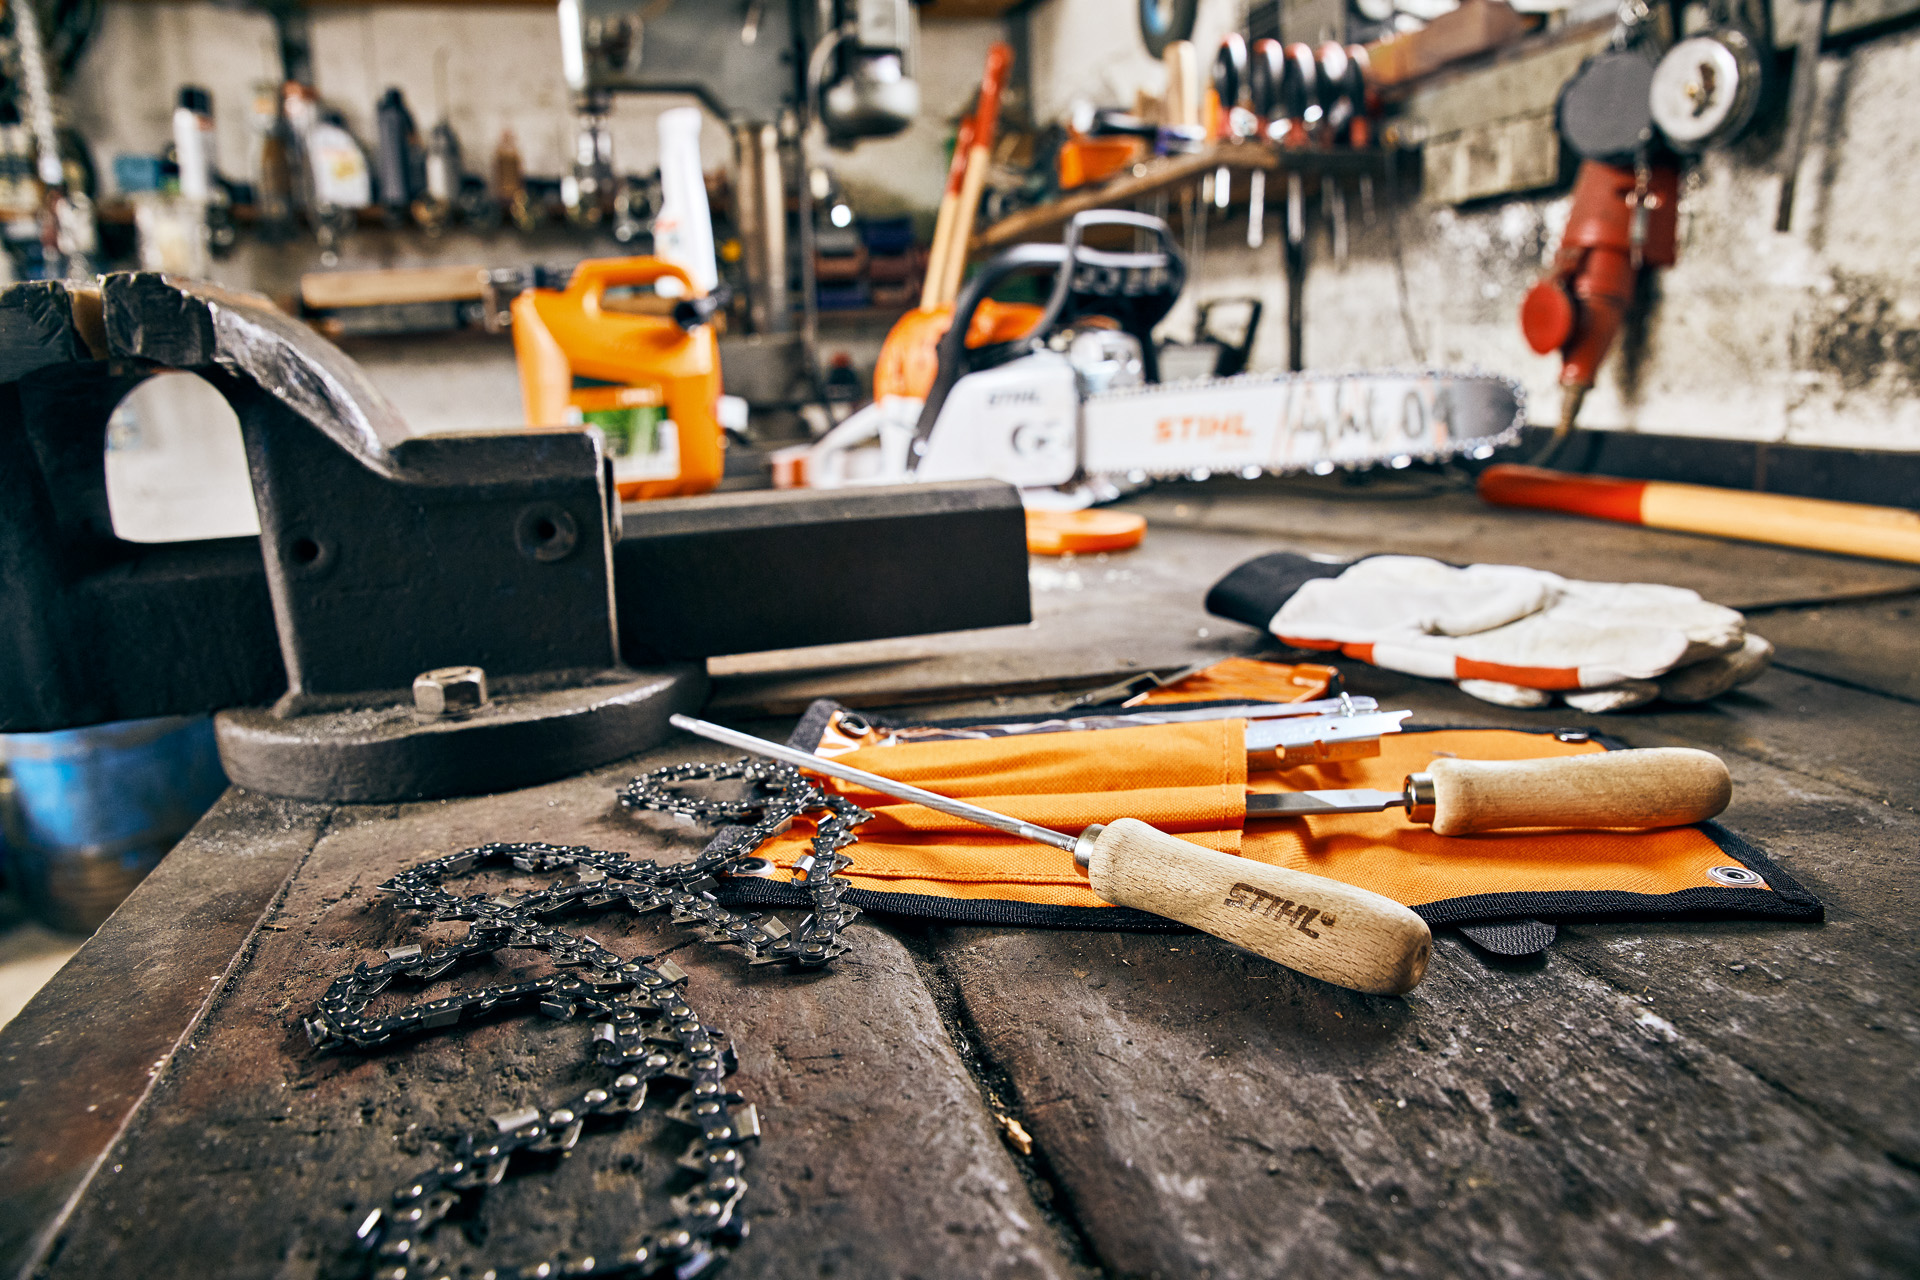 Chains, files, protective equipment and other product accessories from STIHL